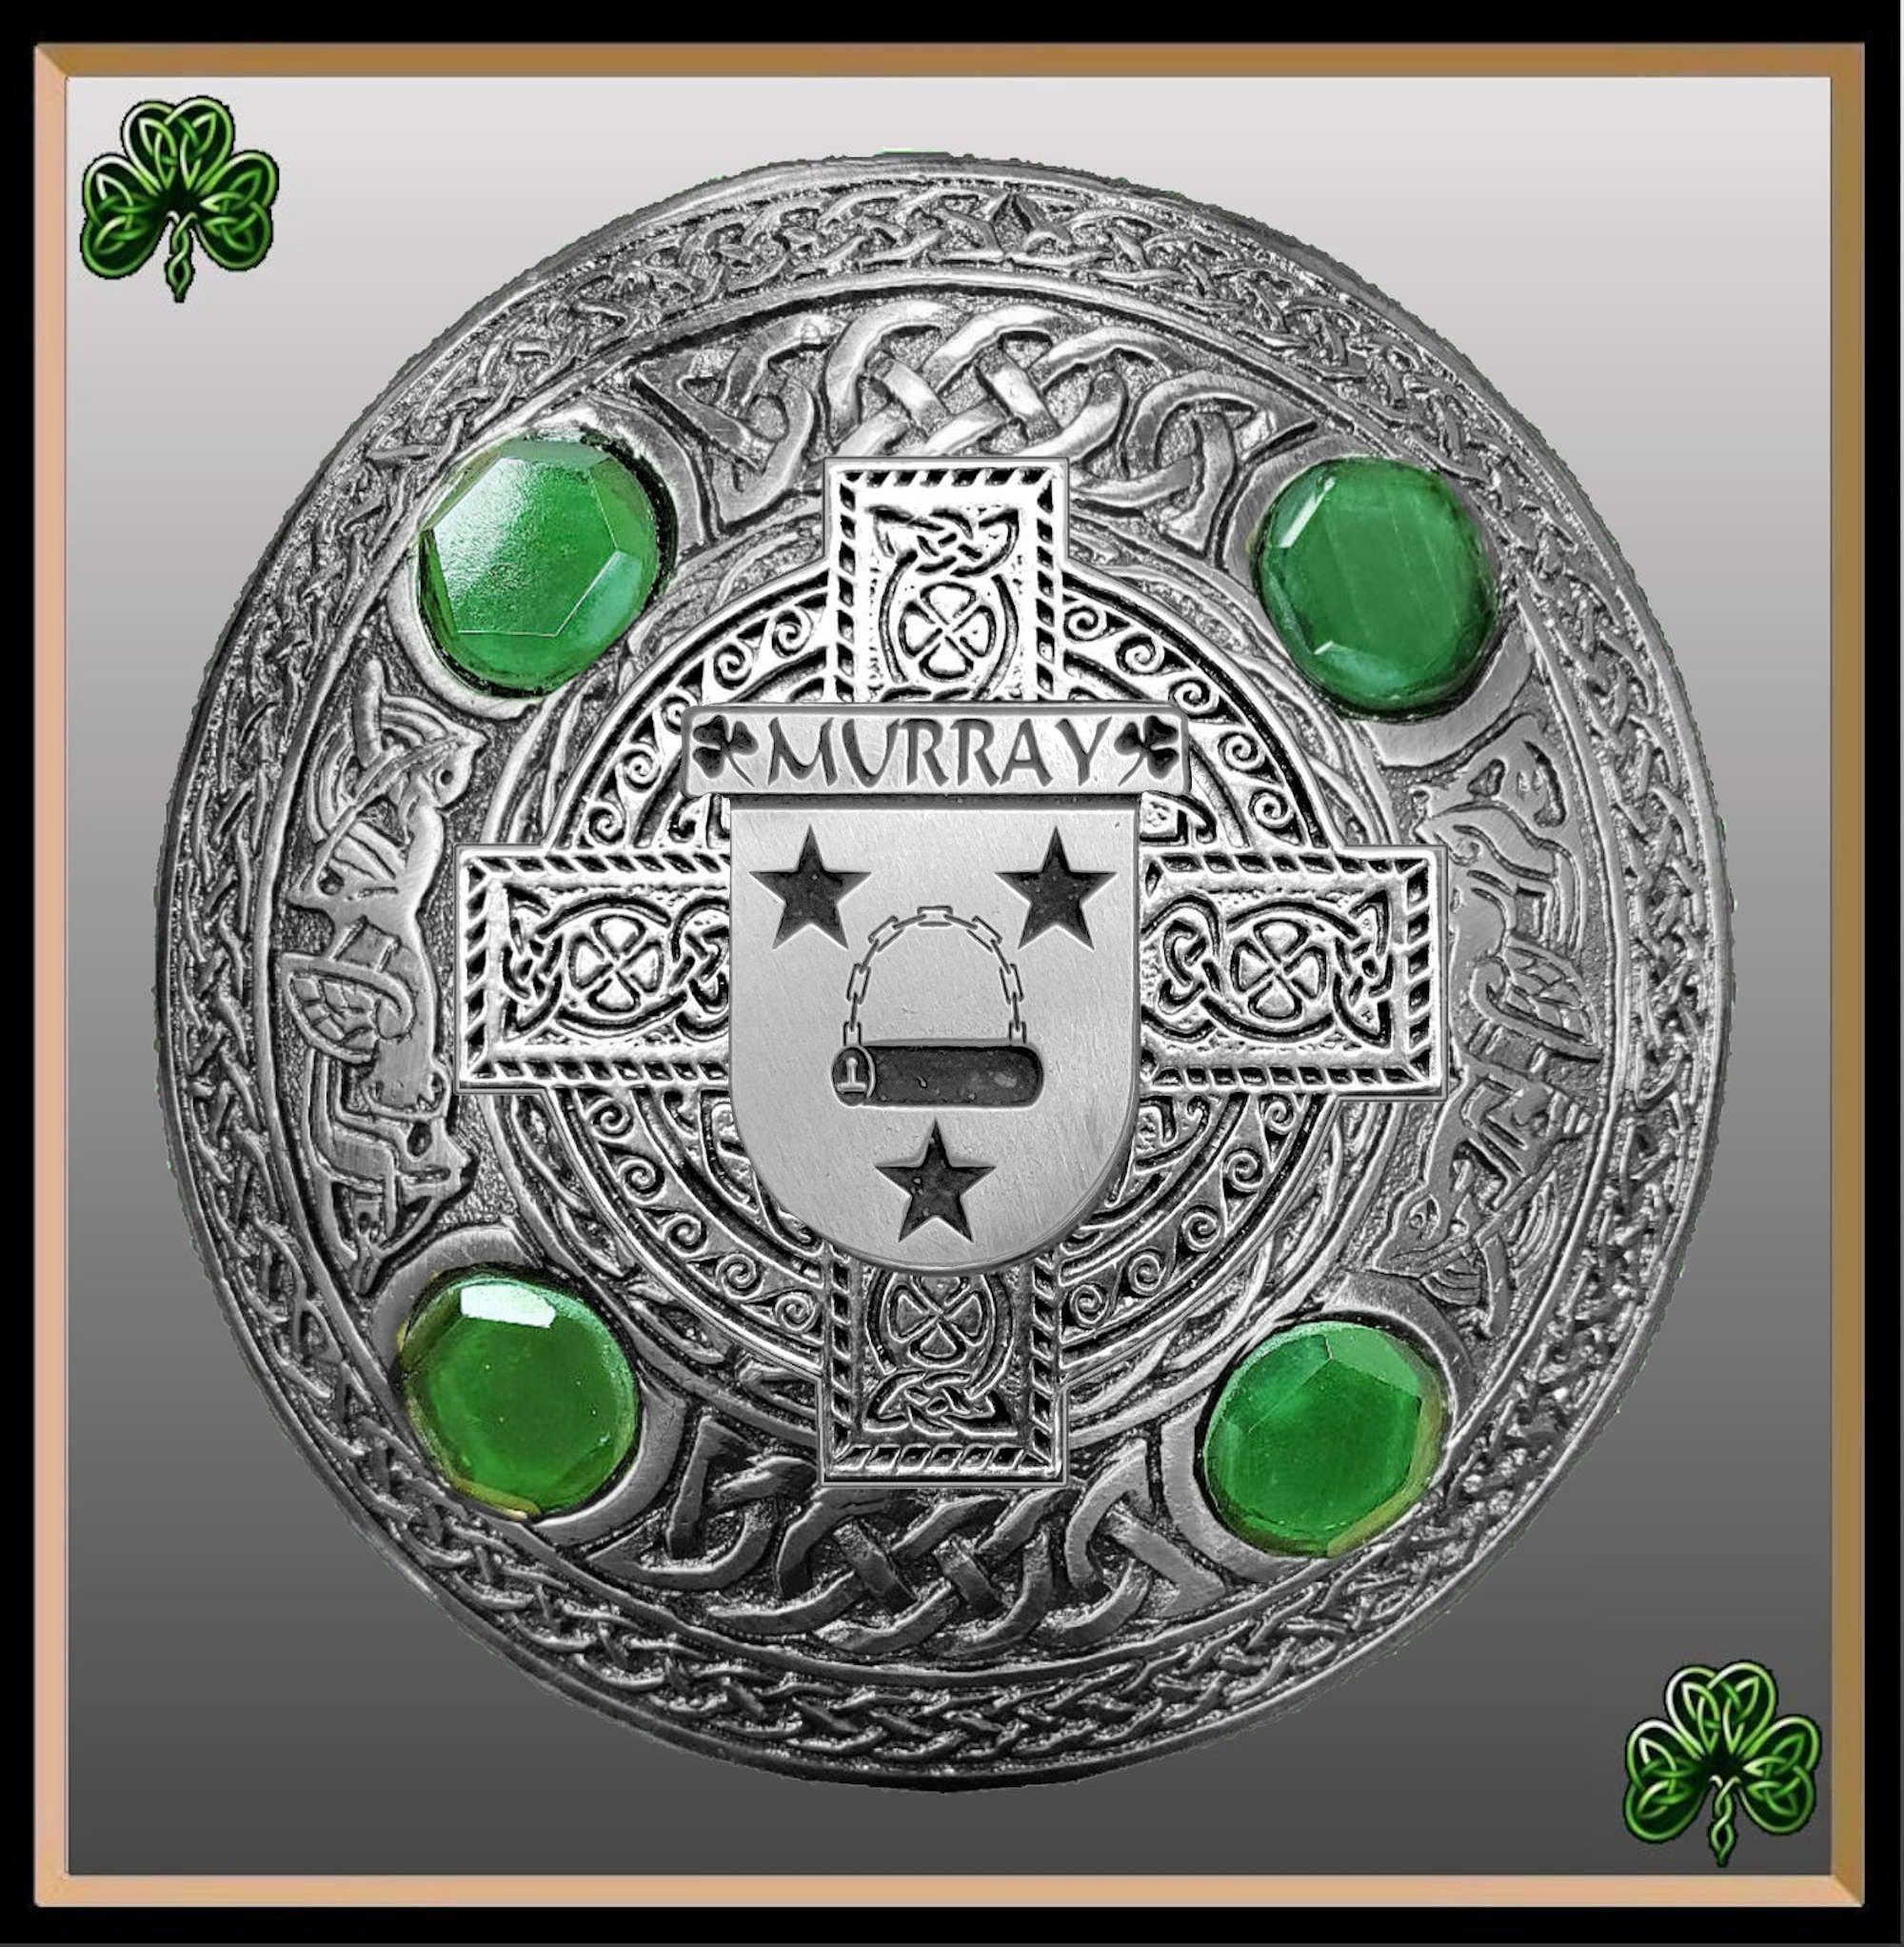 Murray 2 Irish Coat of Arms Celtic Cross Plaid Brooch with Green Stones